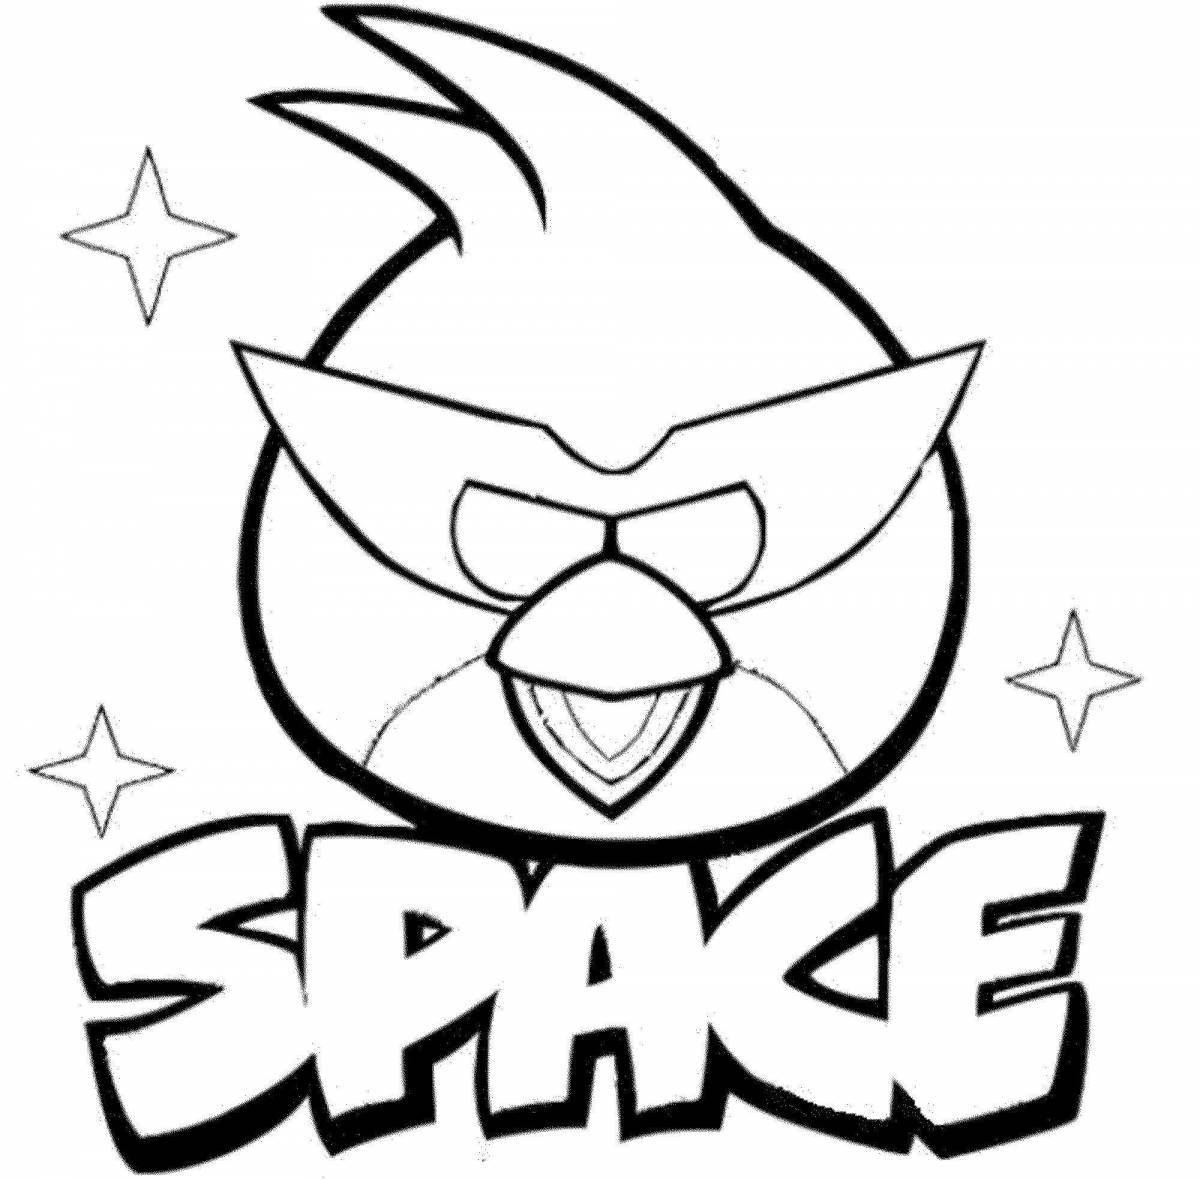 Colorful angry birds coloring page